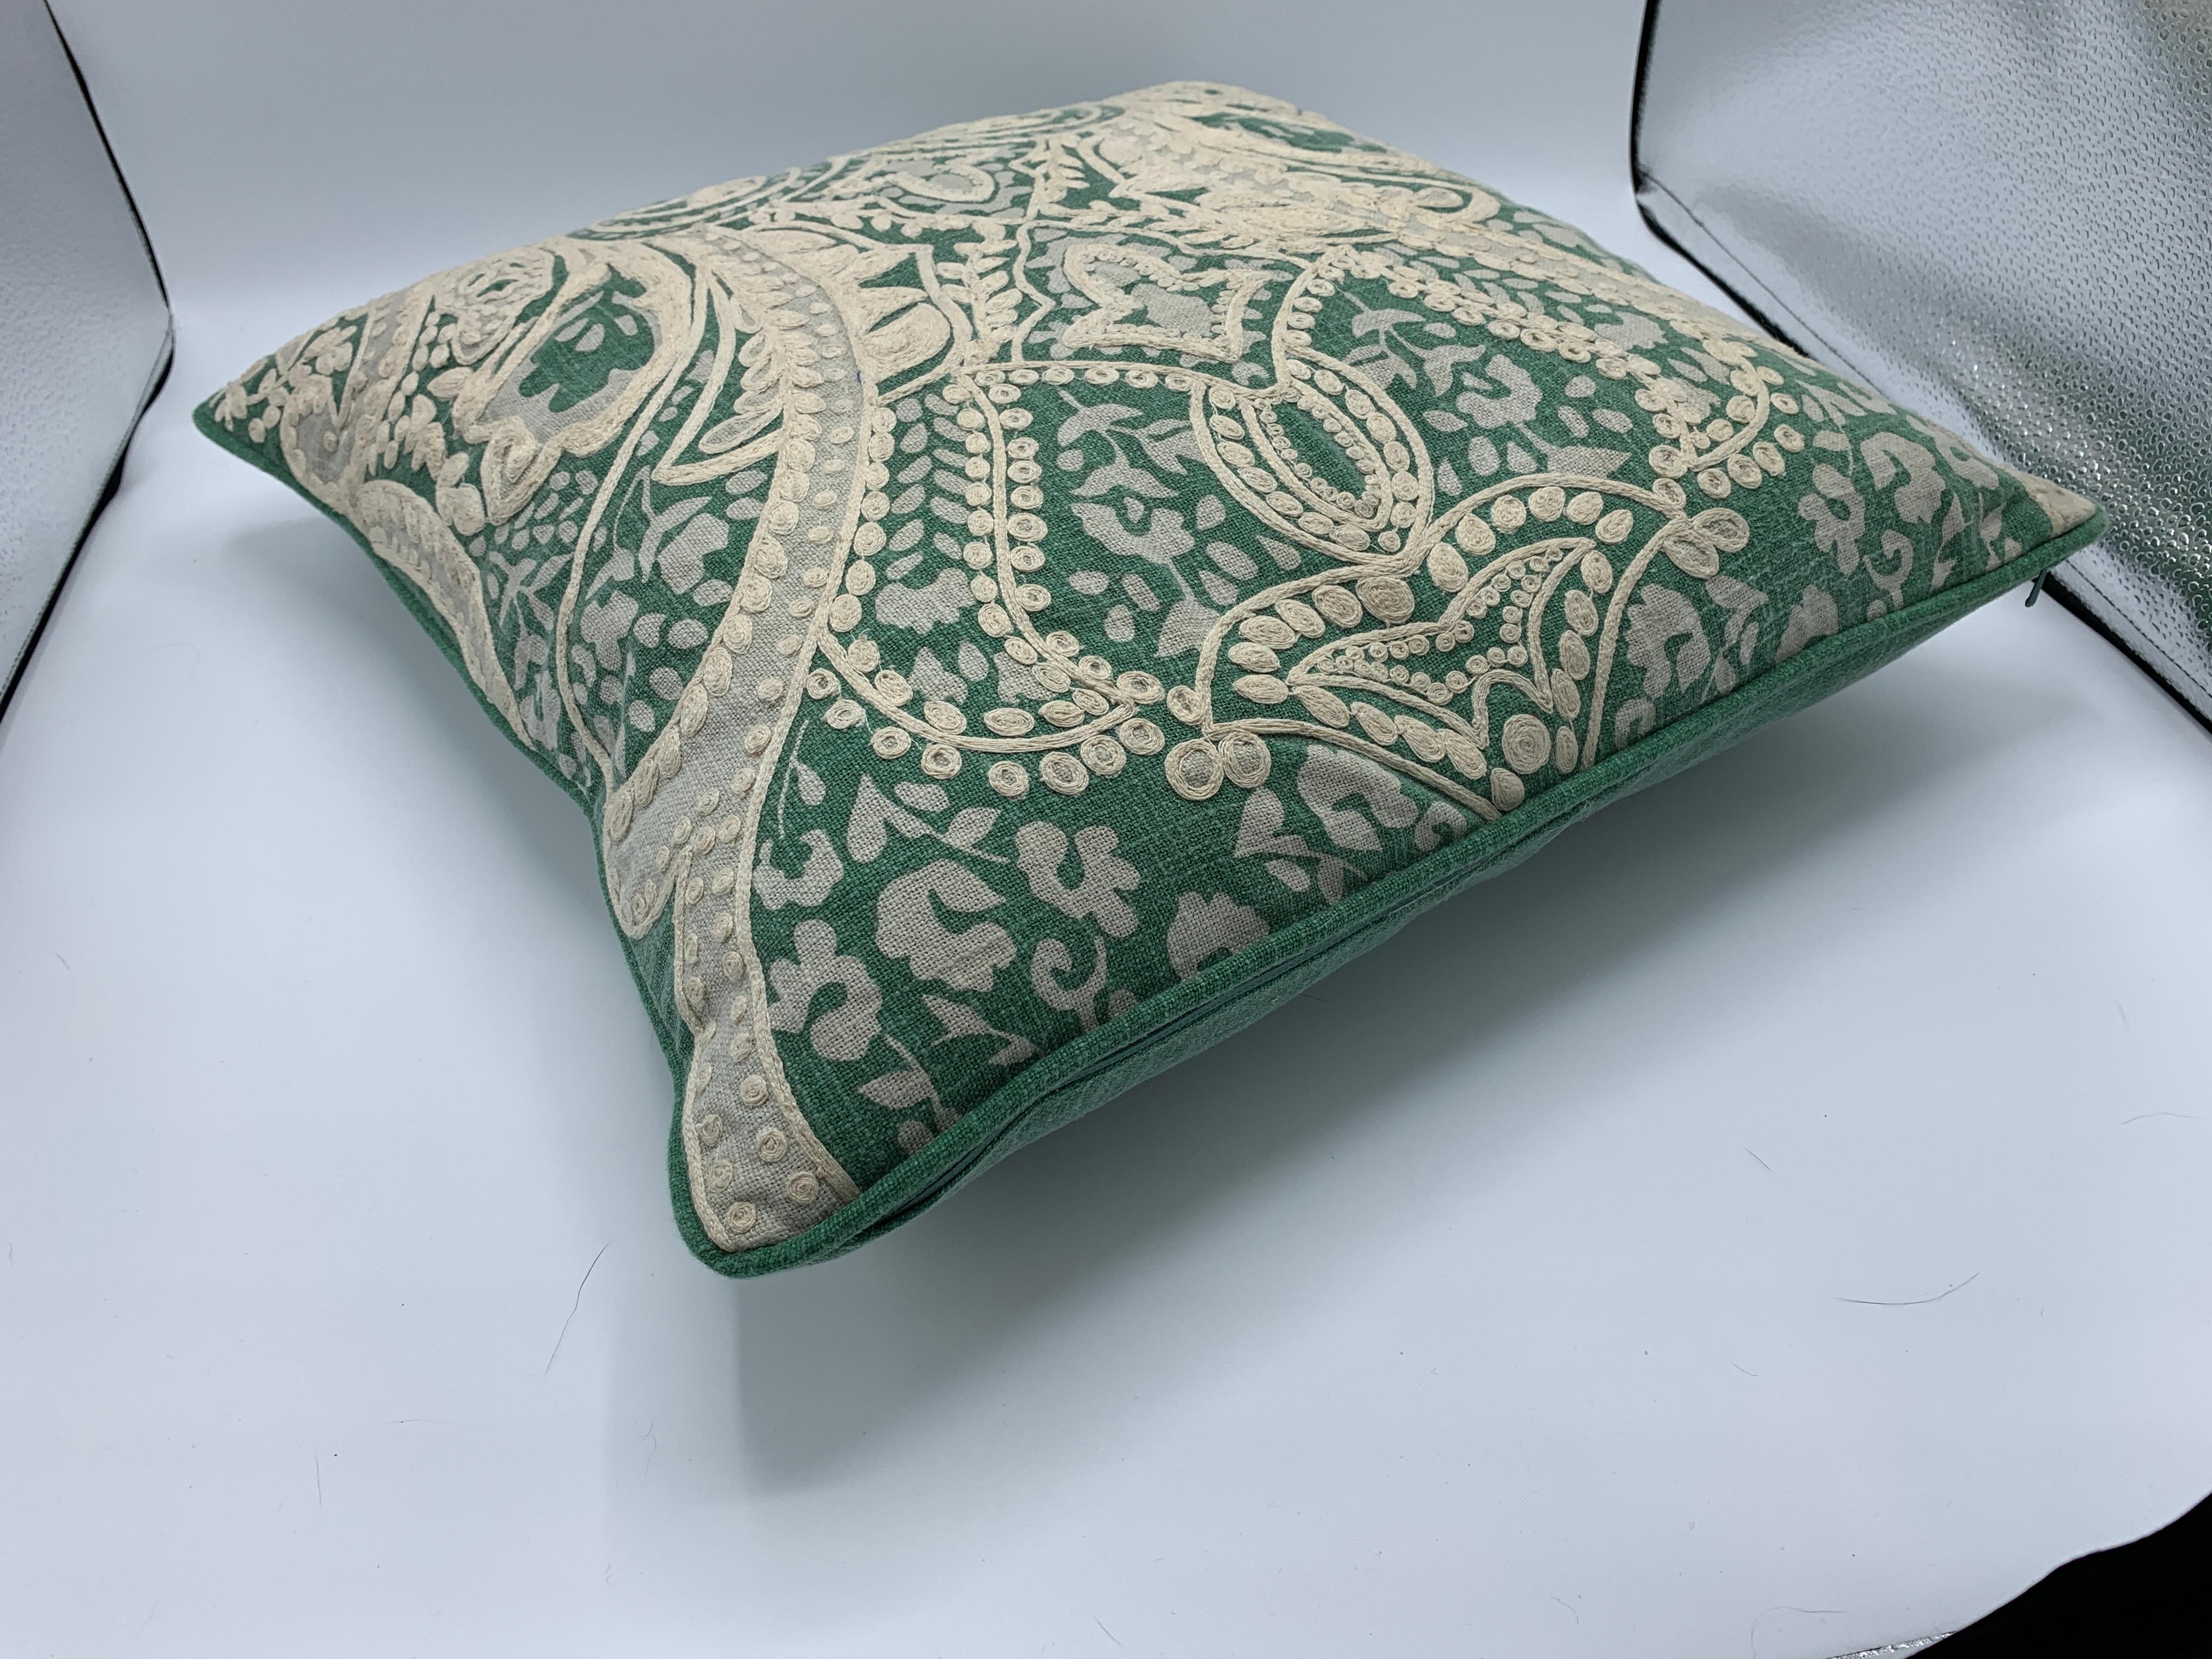 20th Century Green and White Linen Pillows with Damask Embroidery, Pair For Sale